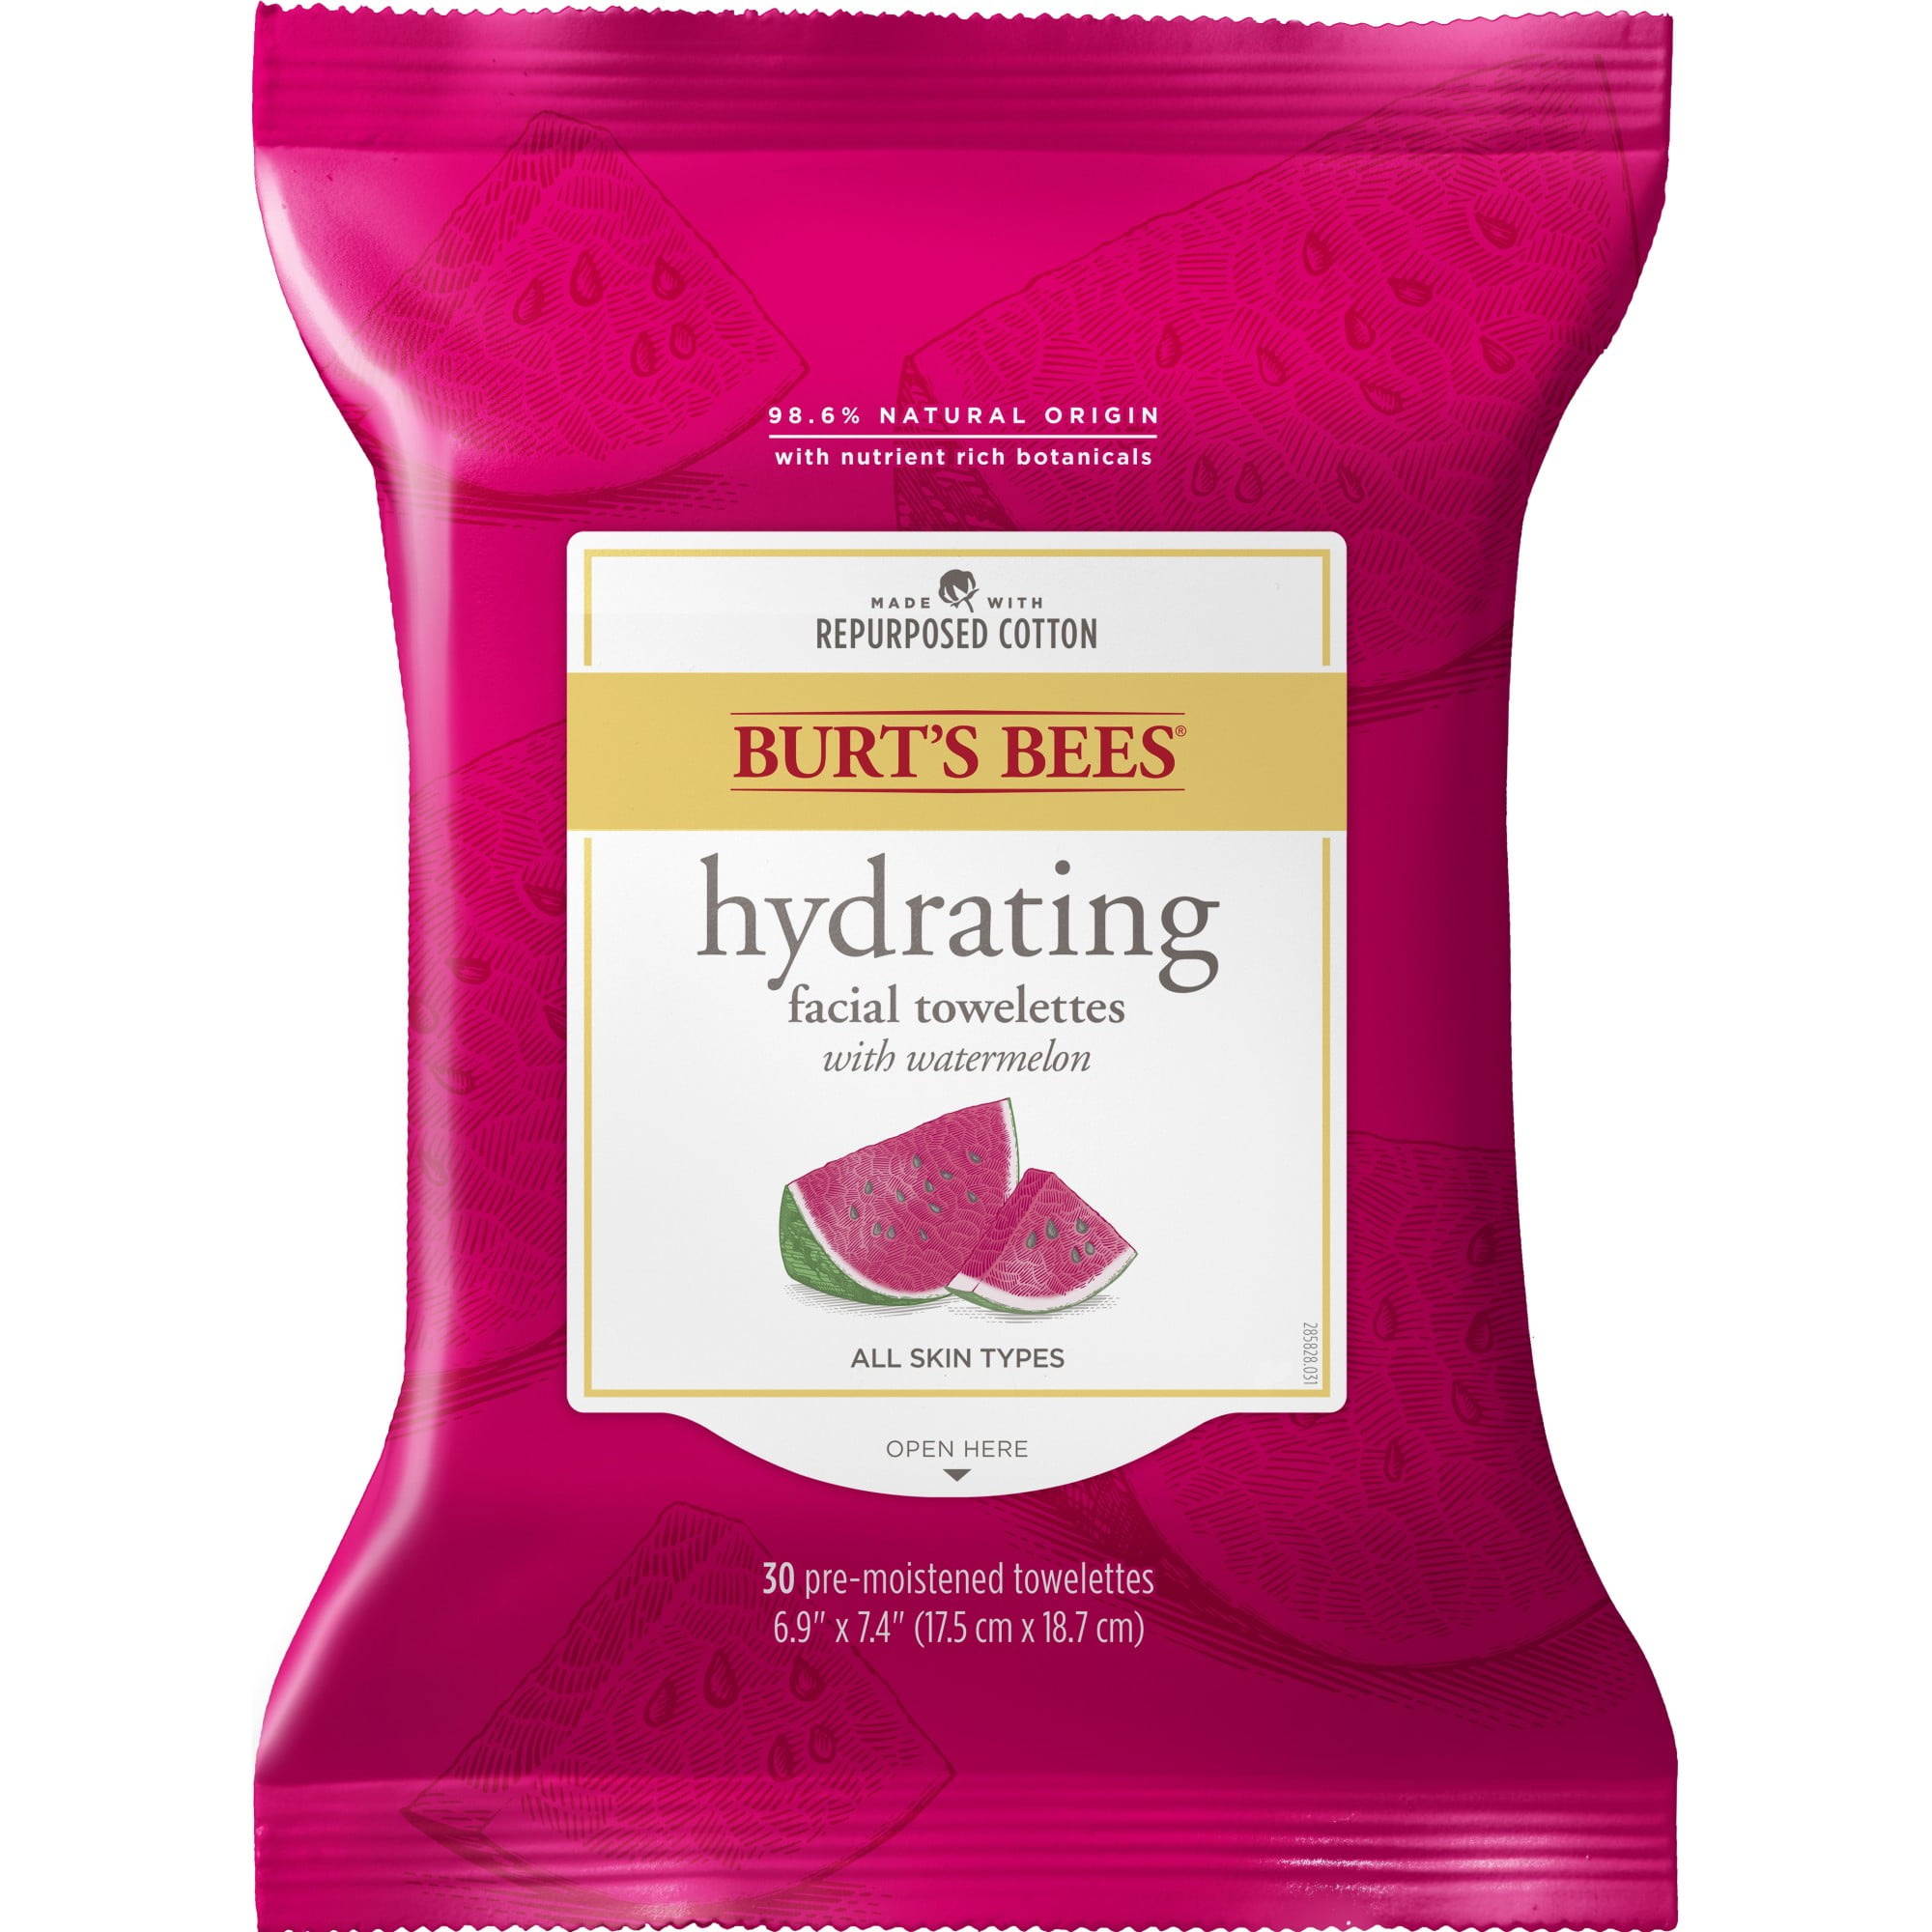 Burts Bees Hydrating Pre-moistened Cleanser Towelettes with Watermelon, 30 Count - Walmart.com